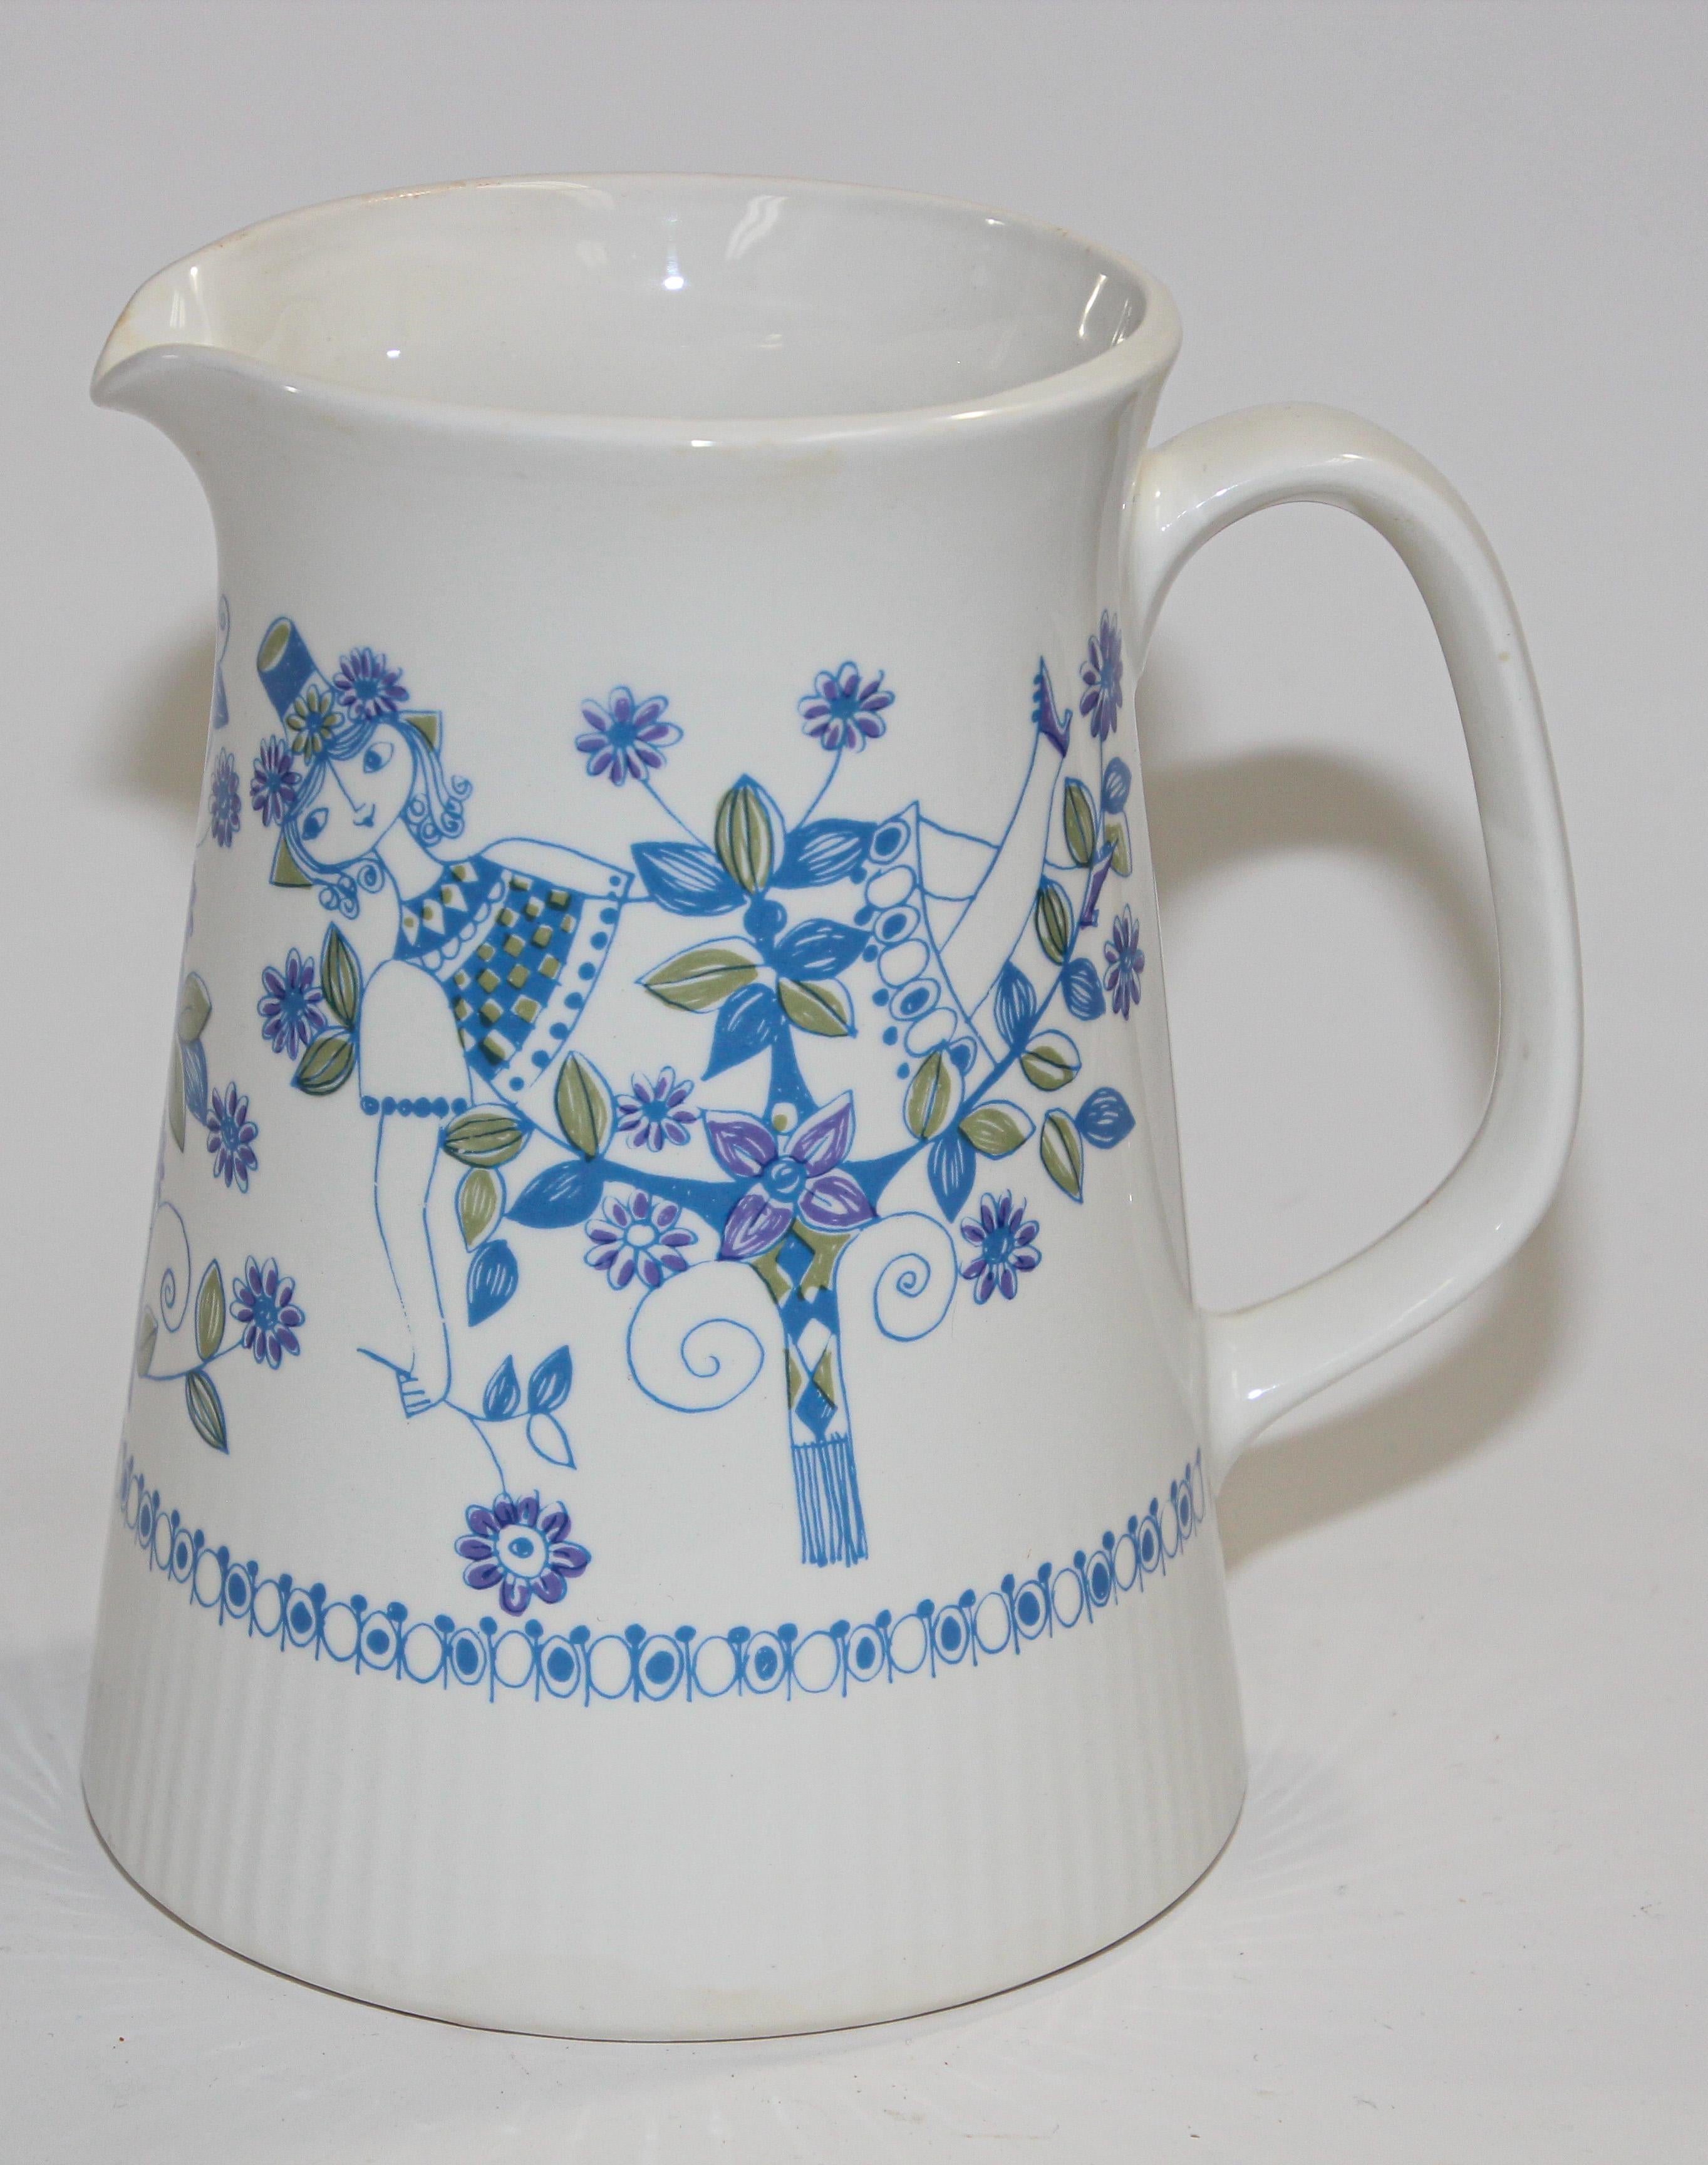 Vintage Turi-Design Lotte hand painted pitcher, Made in Norway, stamped 1075 on Bottom, F/F Figgjo Flint Flameware, # 1075.
The pitcher is high gloss white ceramic with a girl wearing a flower hat relaxing in a floral garden. The blue and olive